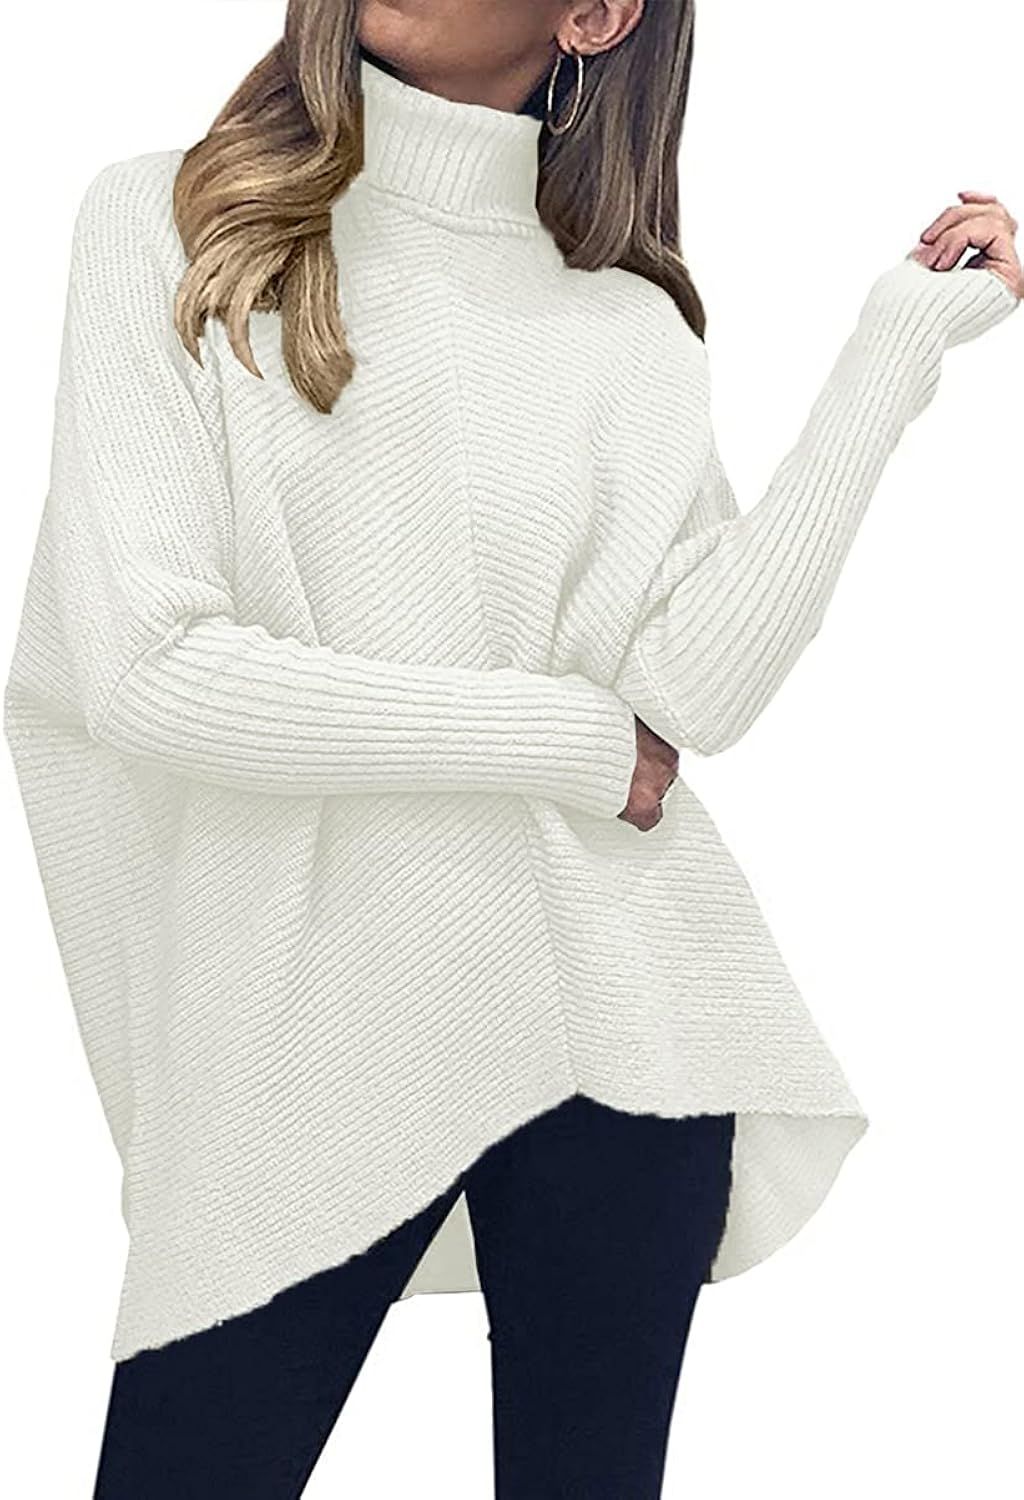 ANRABESS Womens Turtleneck Long Batwing Sleeve Asymmetric Hem Casual Pullover Sweater Knit Tops | Amazon (US)